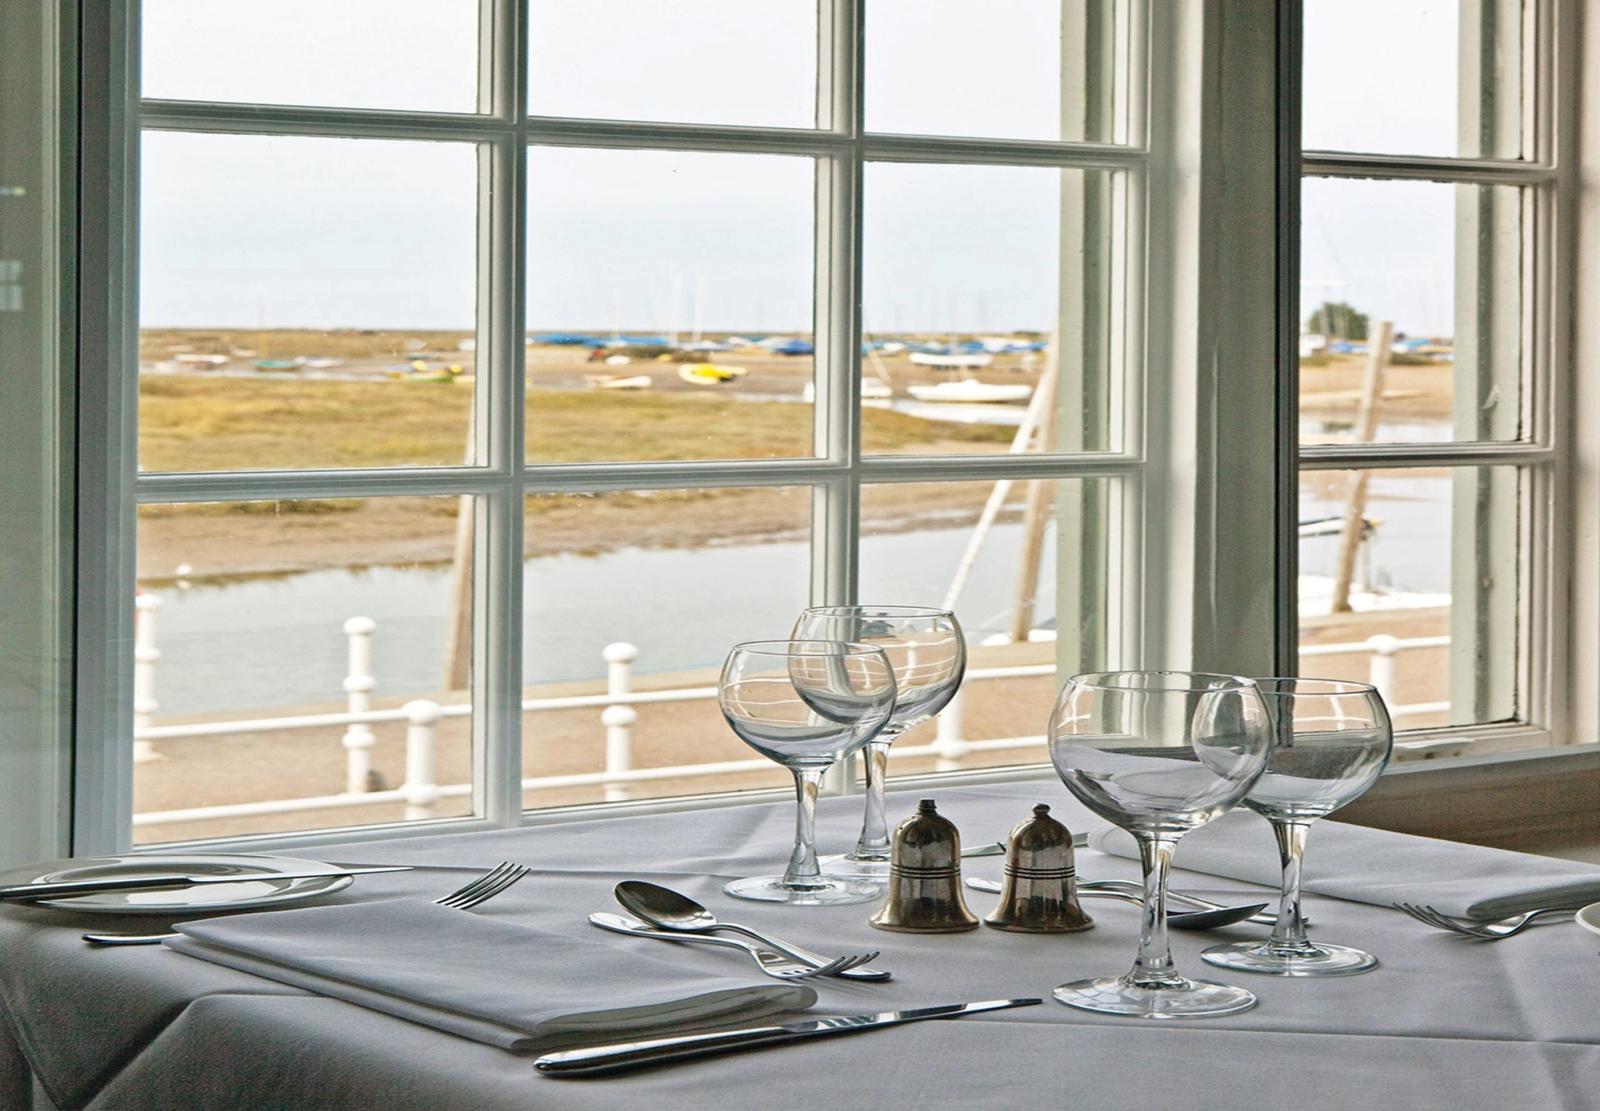 Hotels by the sea in Norfolk